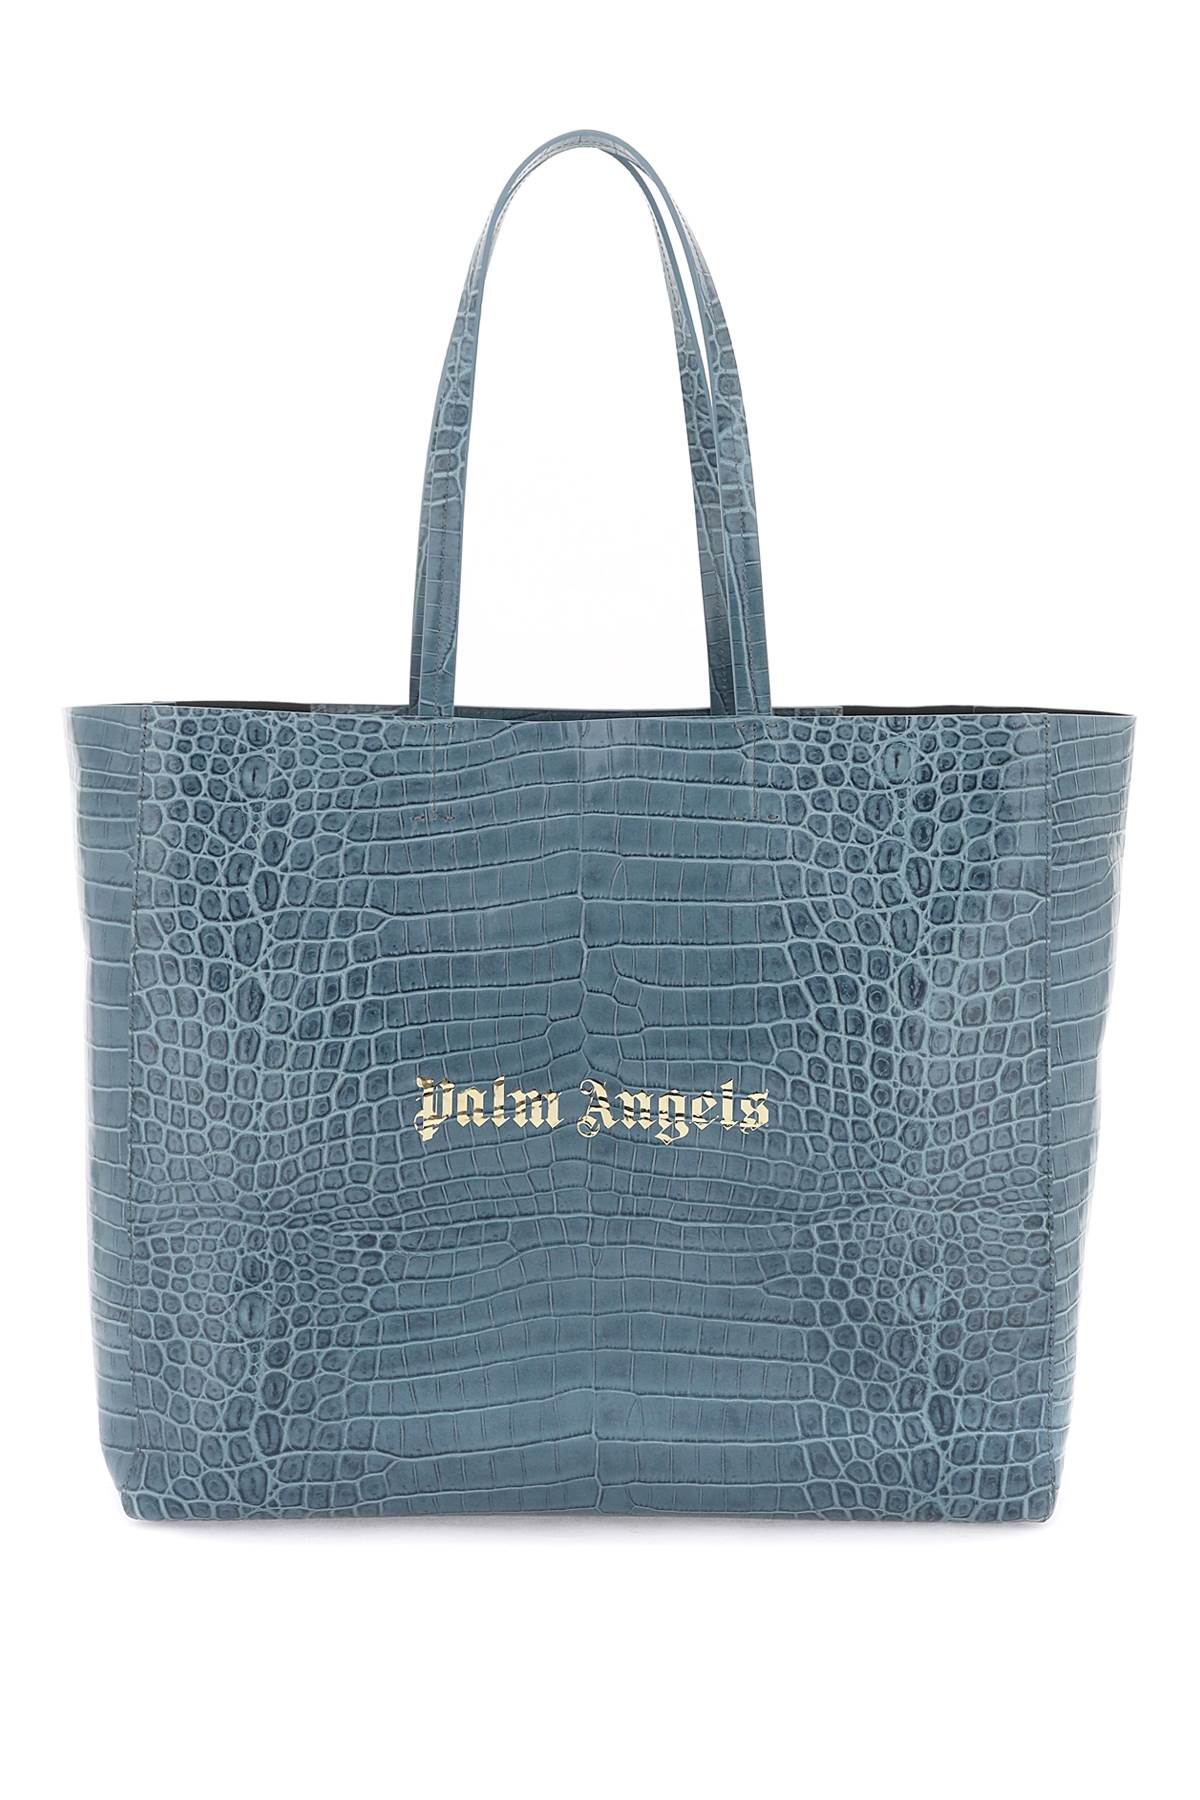 PALM ANGELS CROCO-EMBOSSED LEATHER SHOPPING BAG